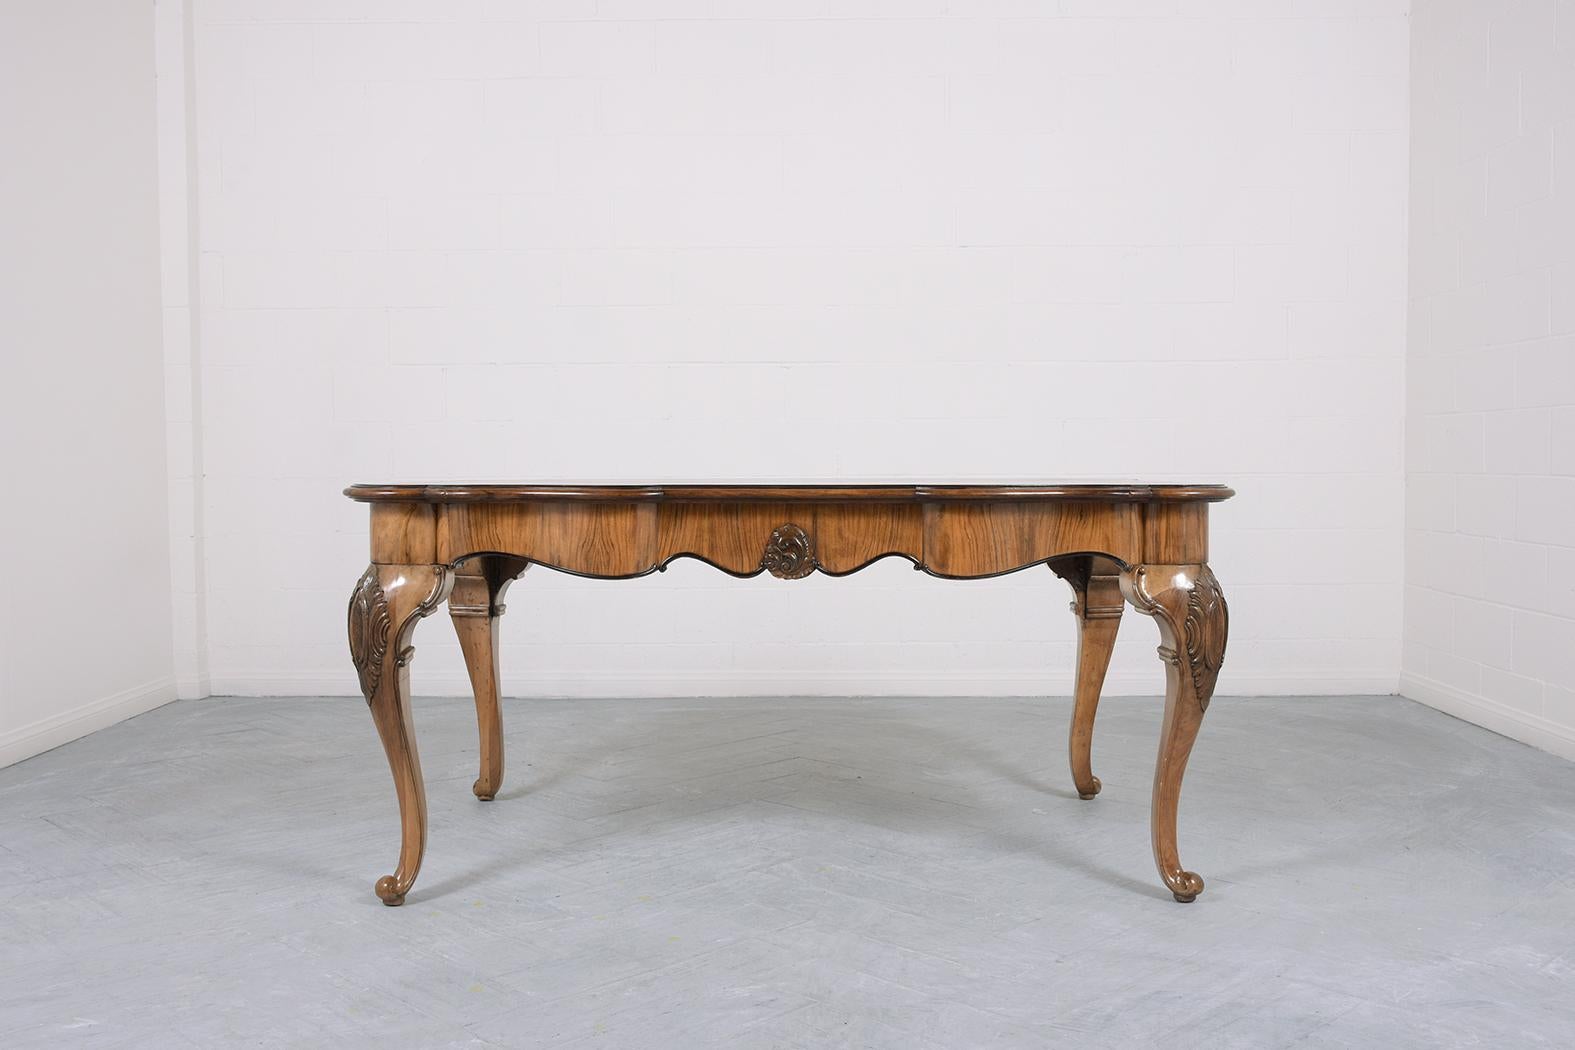 Dive into the charm of the late 19th century with our English antique dining room table, masterfully hand-crafted from rich walnut wood and veneers. Boasting great condition, our team of expert craftsmen has meticulously restored and refinished this